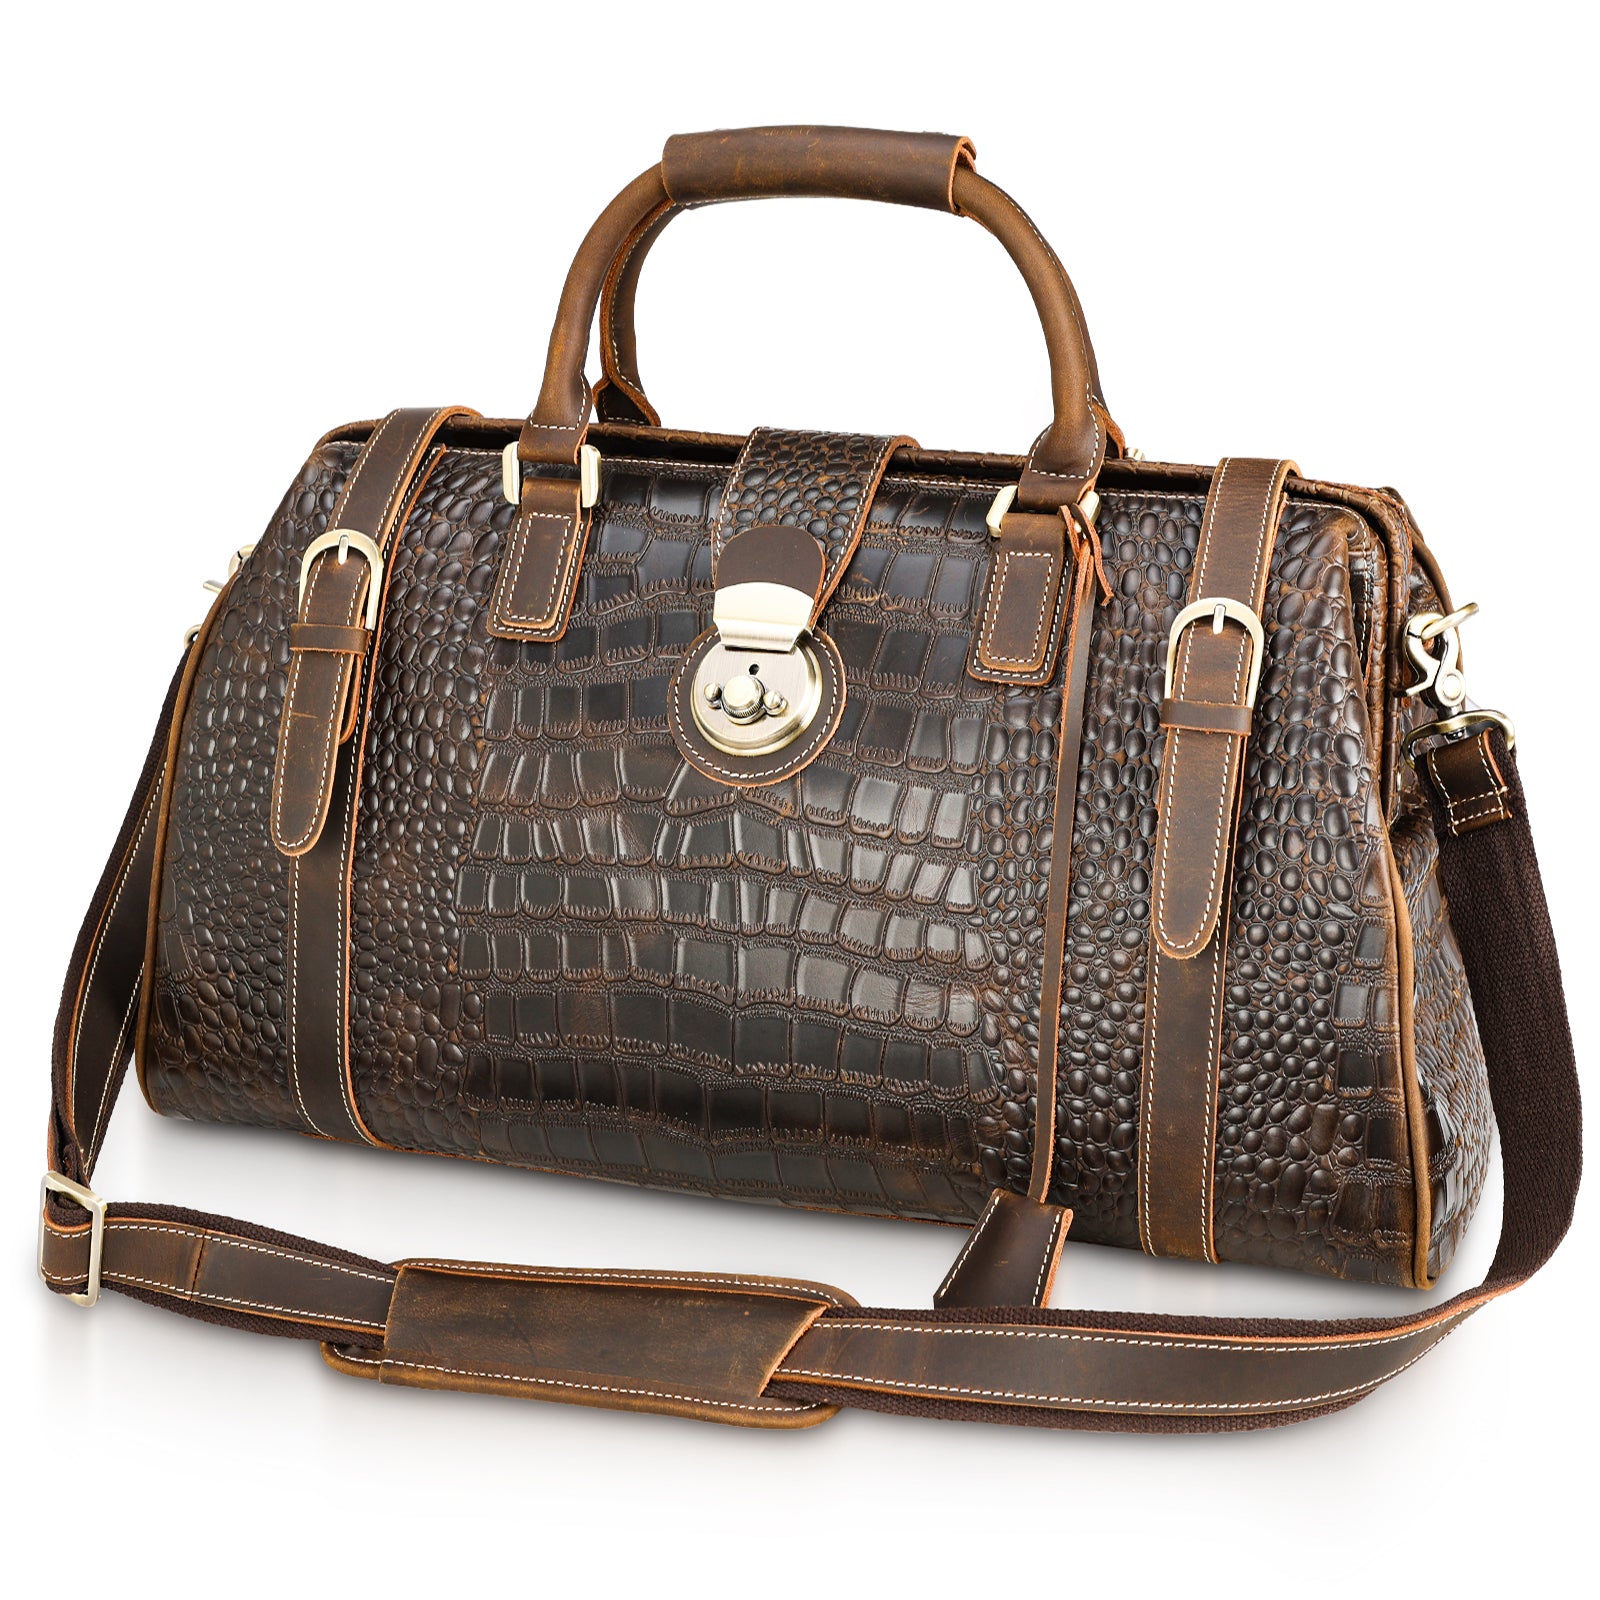 Buy Leather Duffel Bags for Men and Women – VacationGrabs